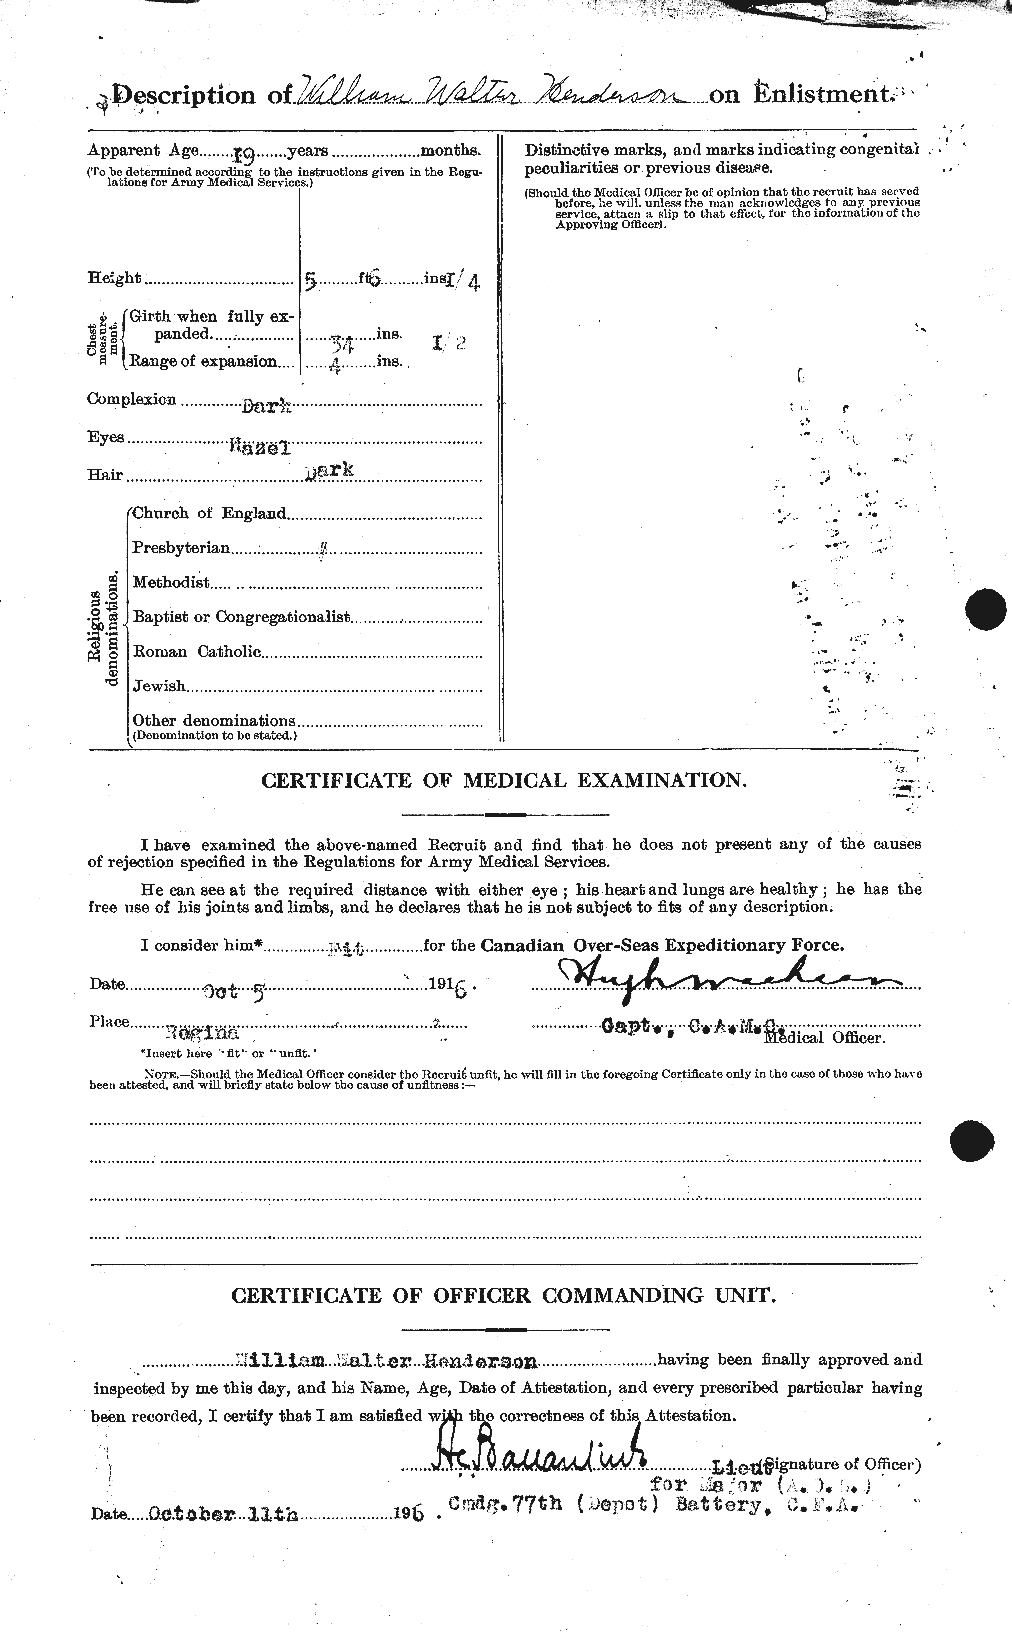 Personnel Records of the First World War - CEF 389080b